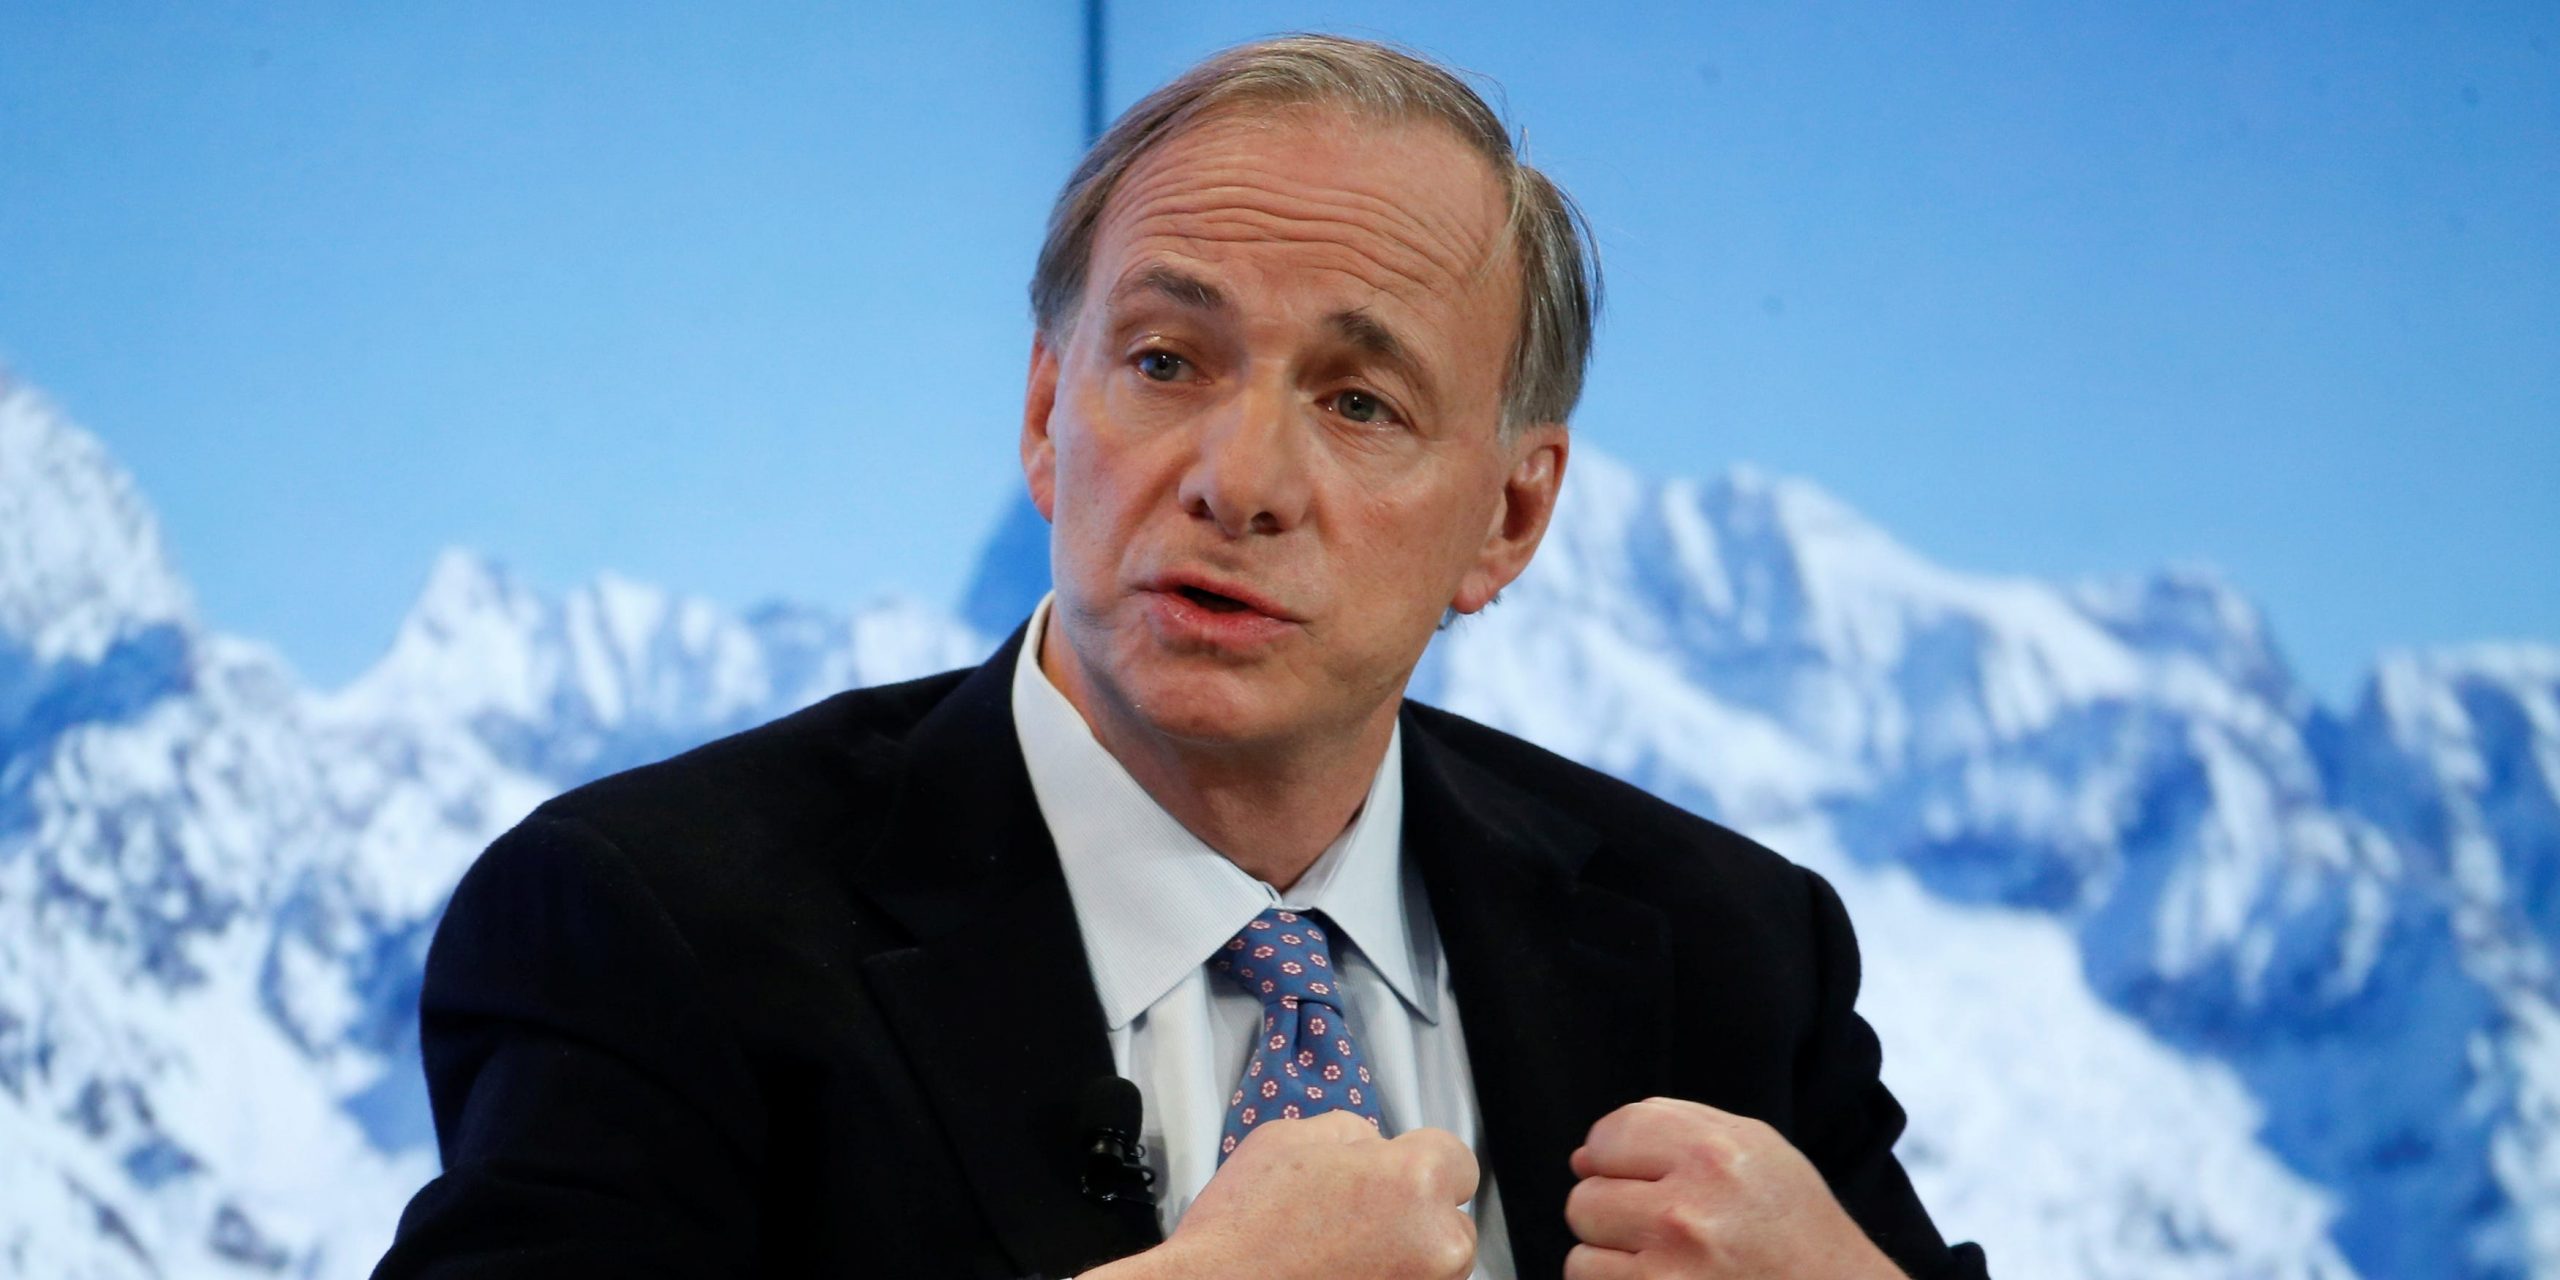 FILE PHOTO: Ray Dalio, Founder, Co-Chief Executive Officer and Co-Chief Investment Officer, Bridgewater Associates attends the annual meeting of the World Economic Forum (WEF) in Davos, Switzerland, January 18, 2017. REUTERS/Ruben Sprich